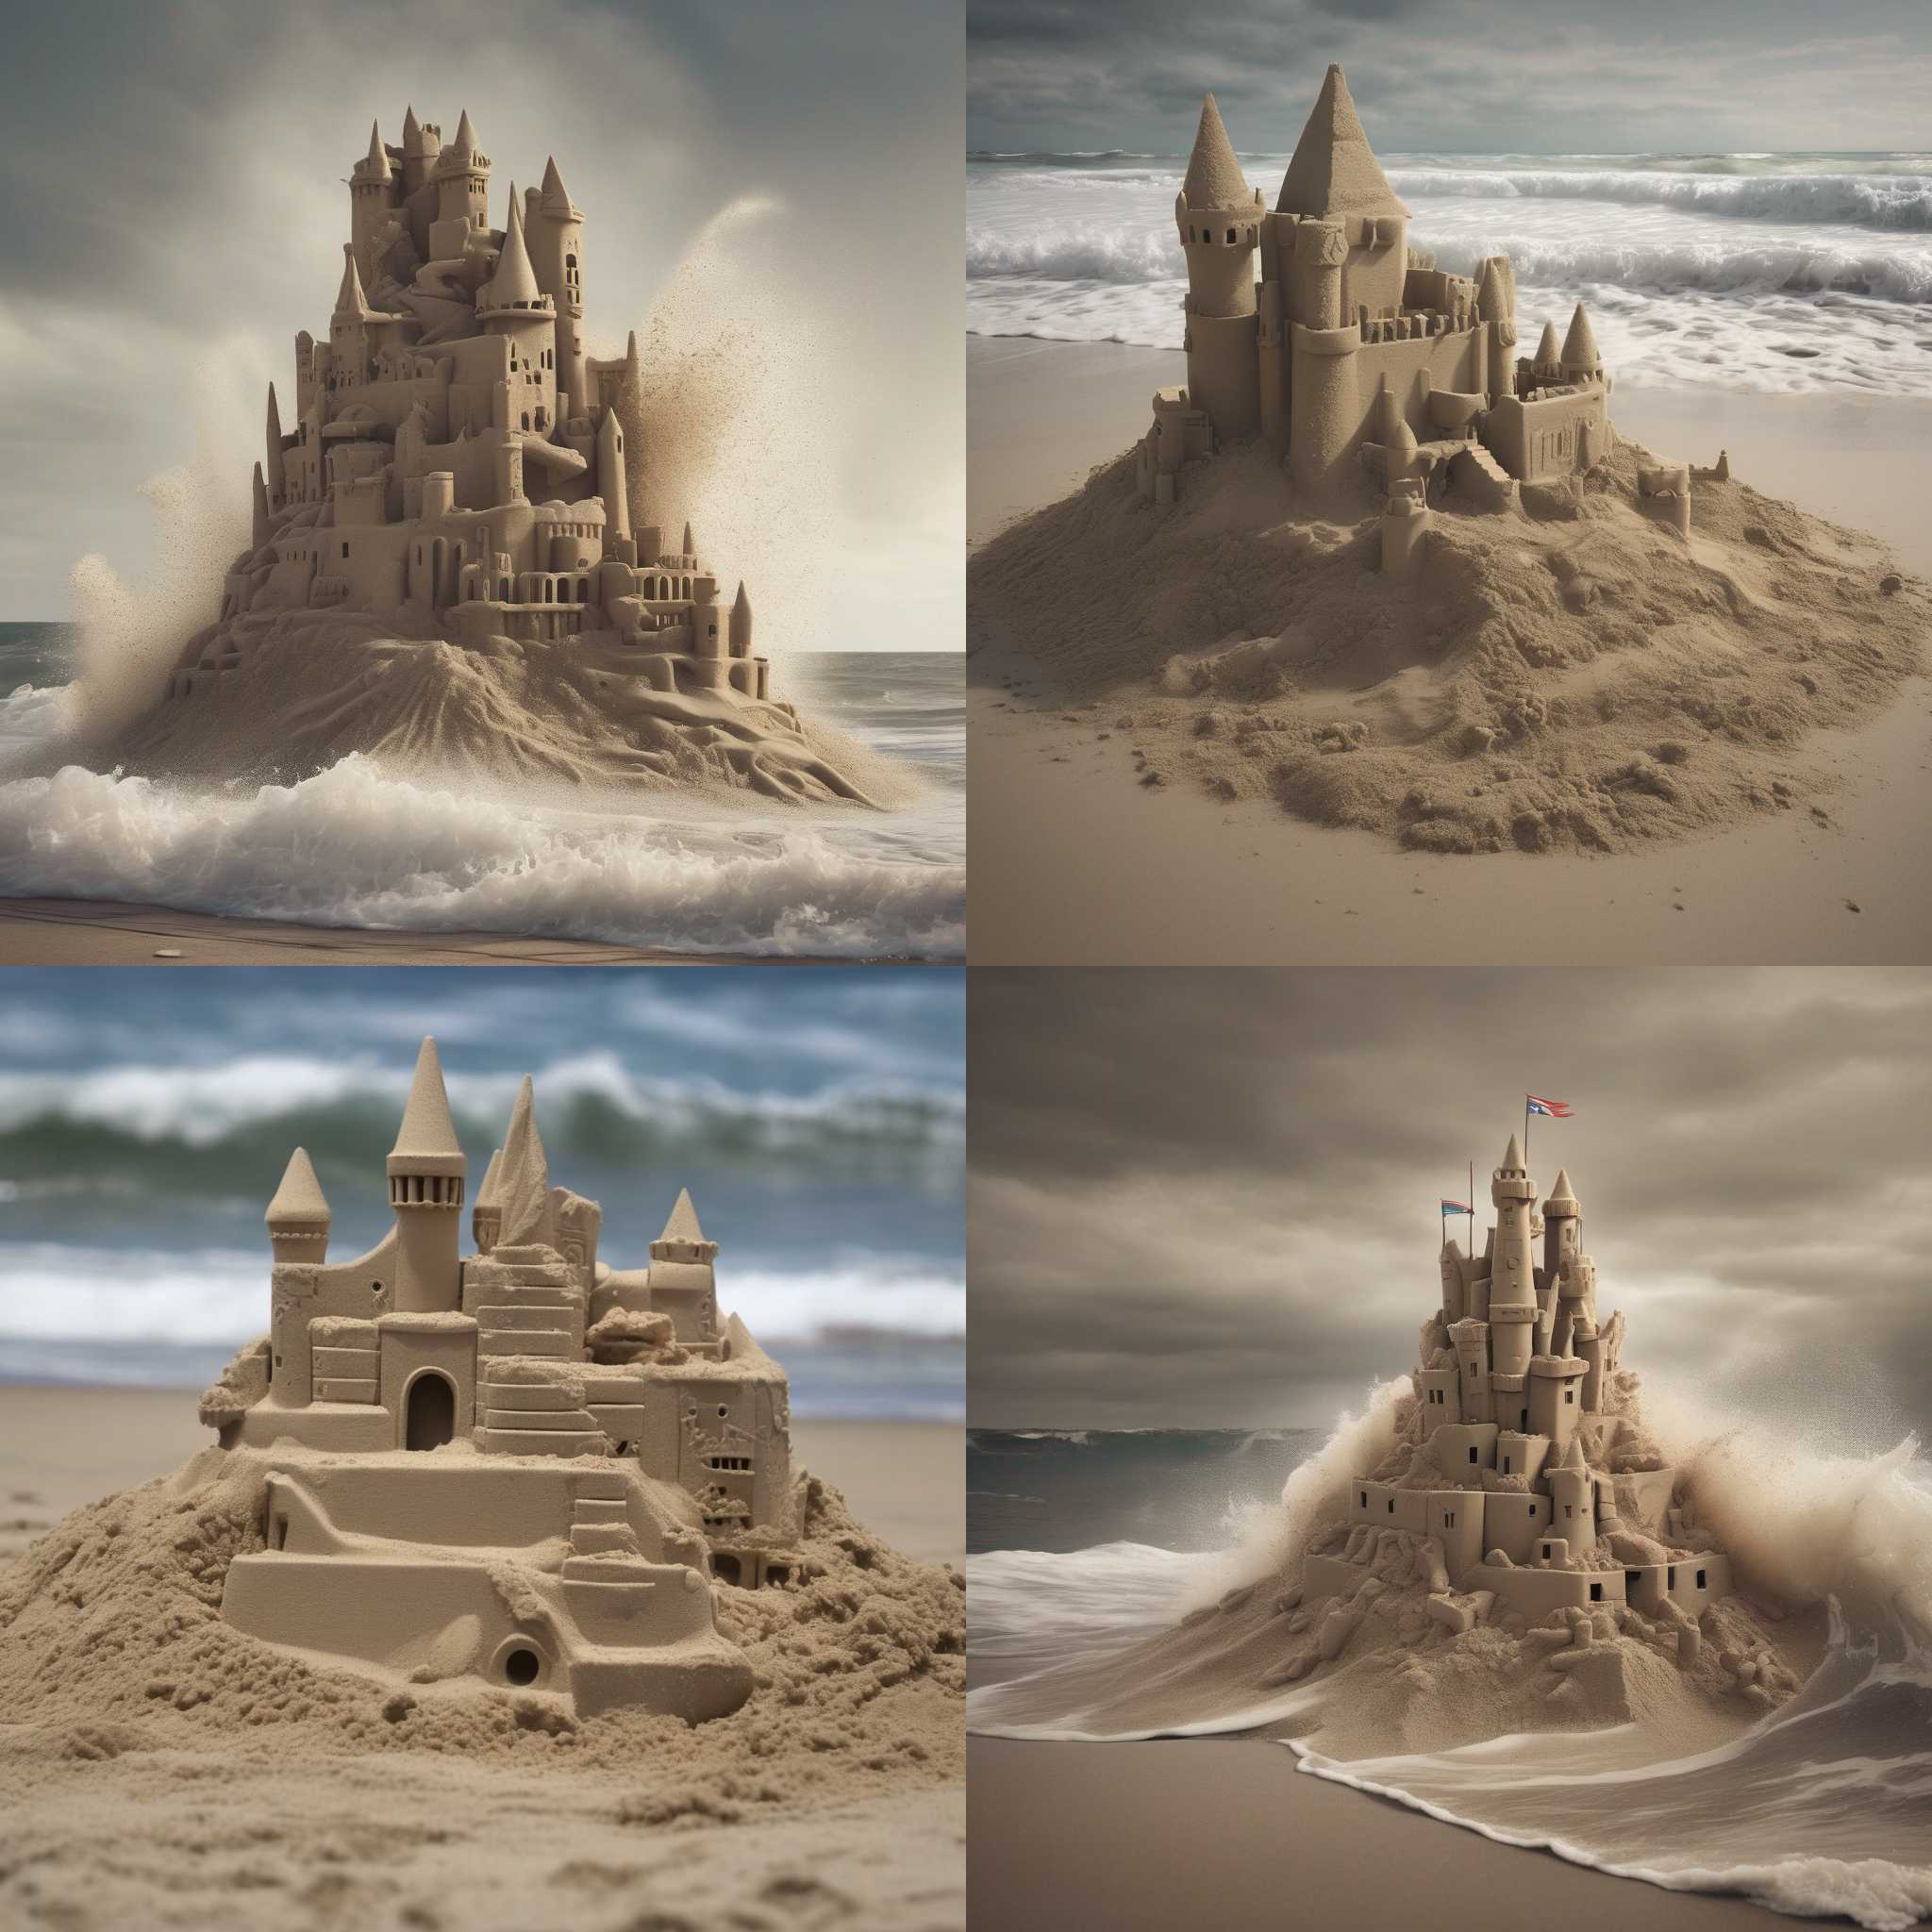 A sandcastle after being hit by a strong wave